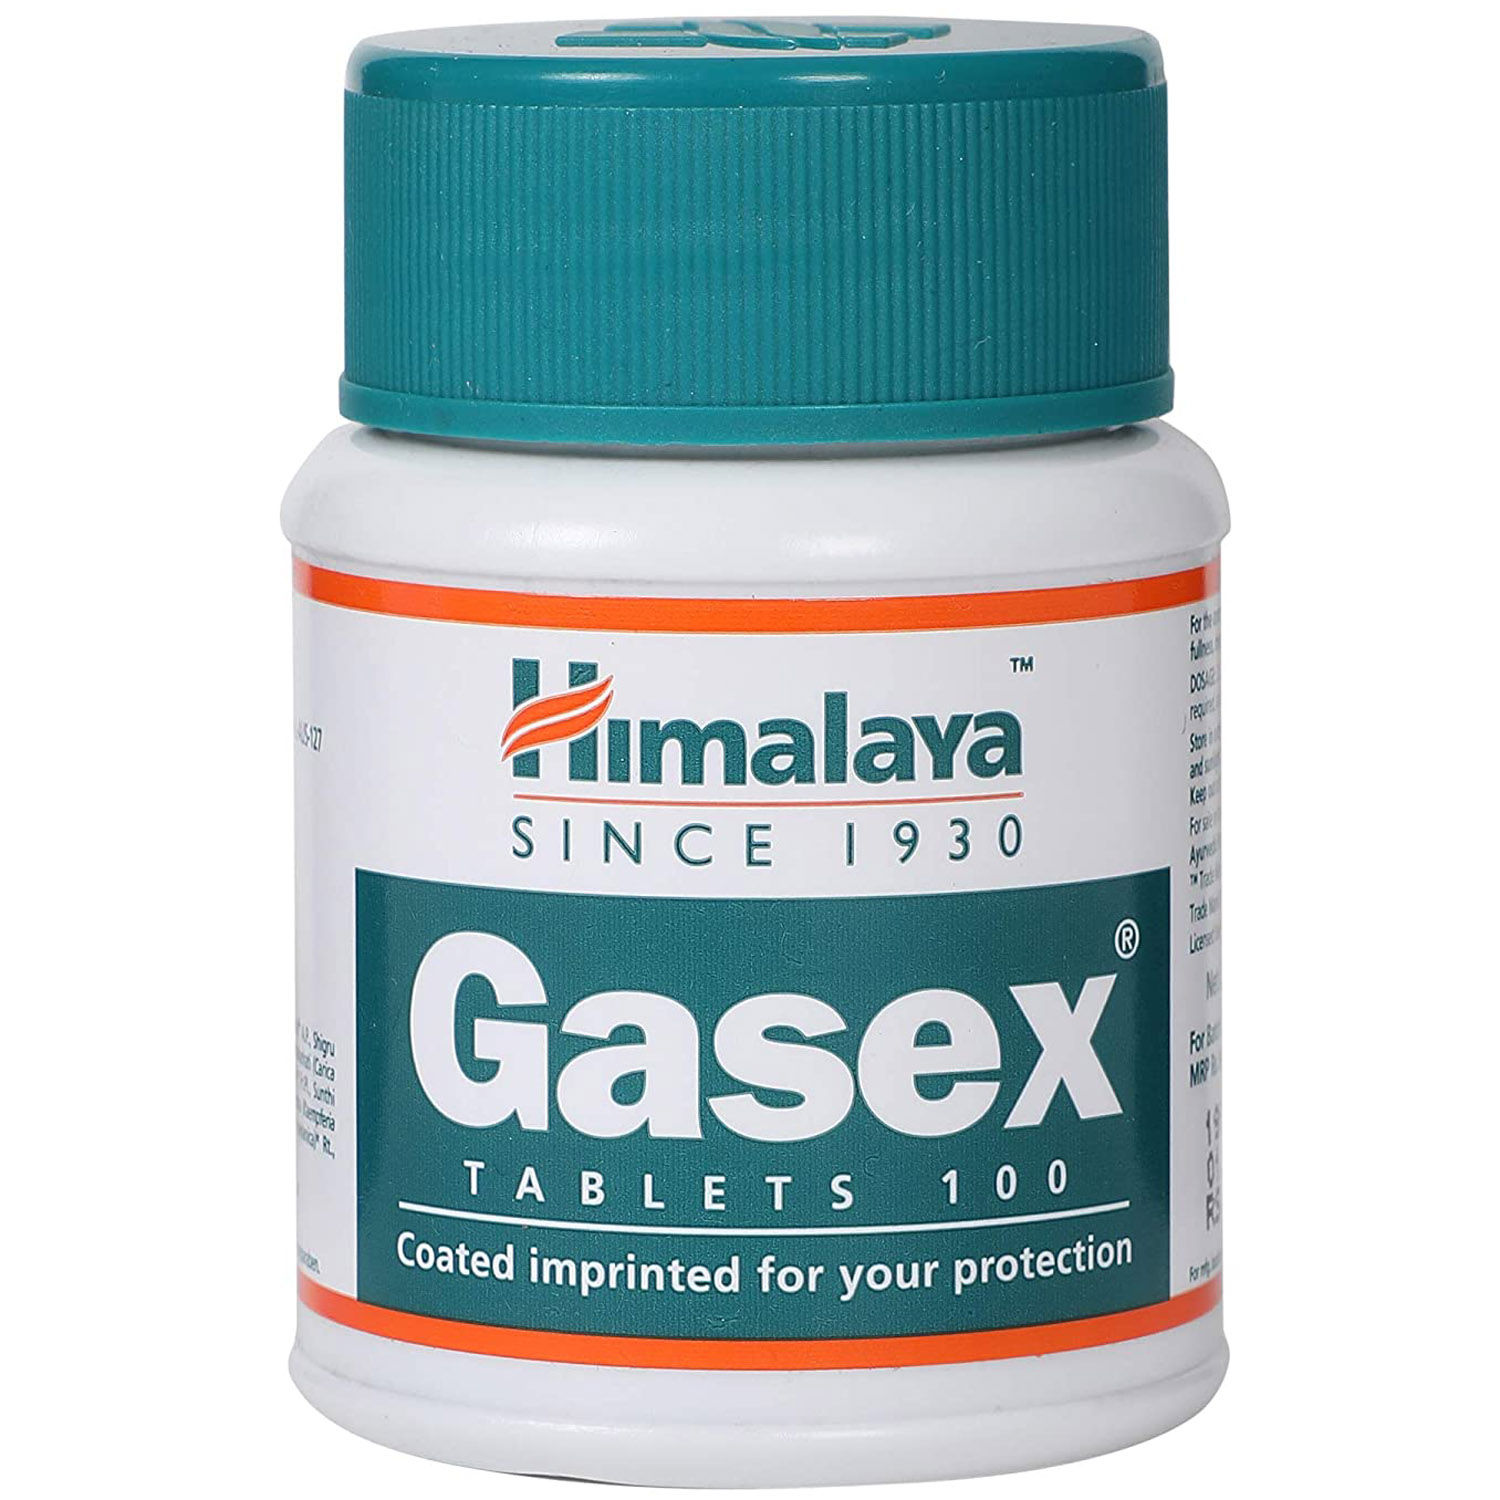 Himalaya Gasex, 100 Tablets, Pack of 1 